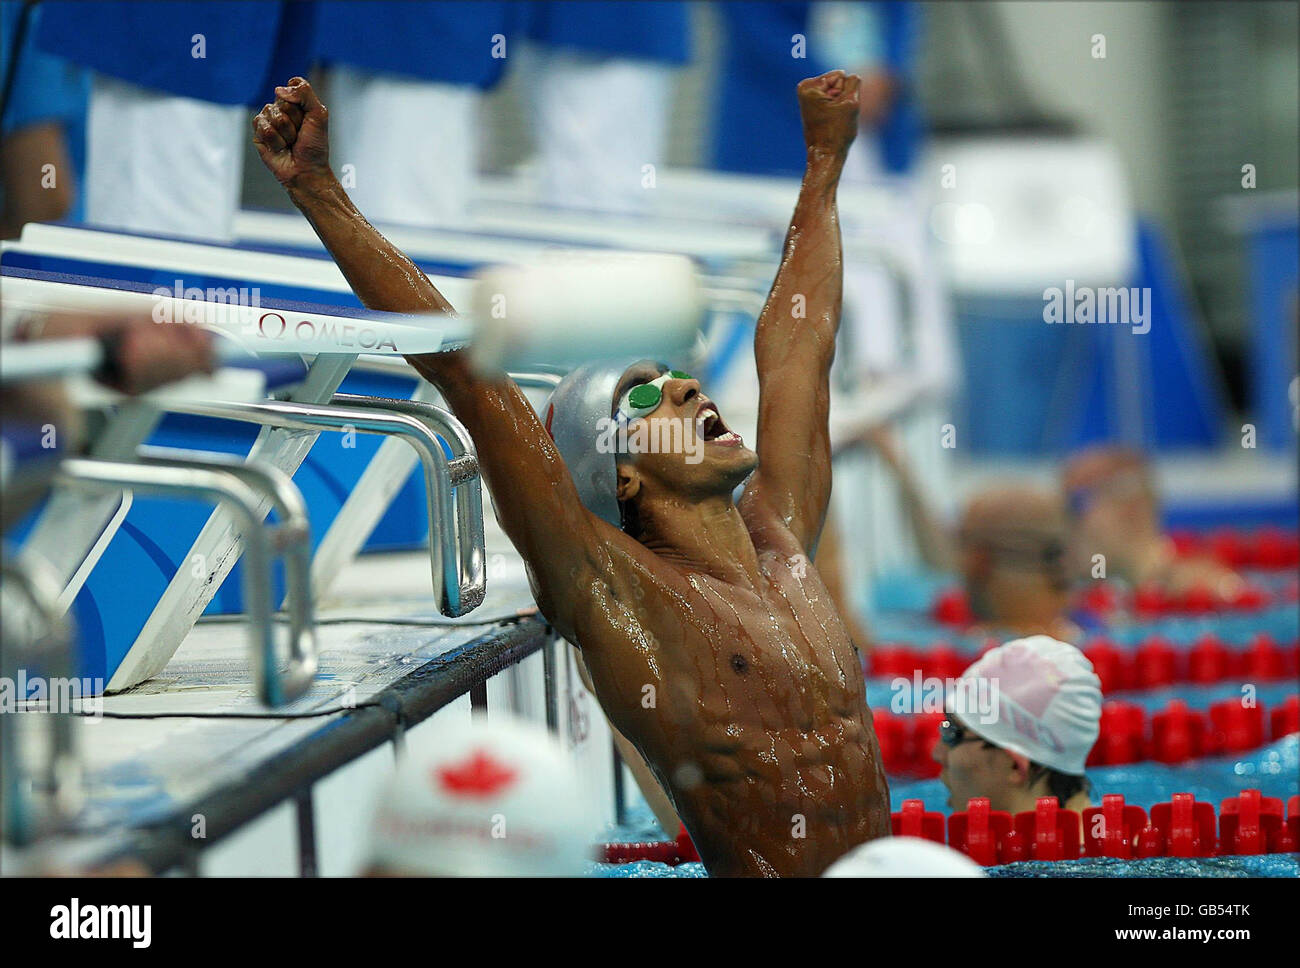 Paralympics - Beijing Paralympic Games 2008 - Day Eight. Spain's Enhamed Enhamed celebrates after he won gold in the men's 50M Freestyle S11 Final in the National Acquatic Centre, Beijing. Stock Photo